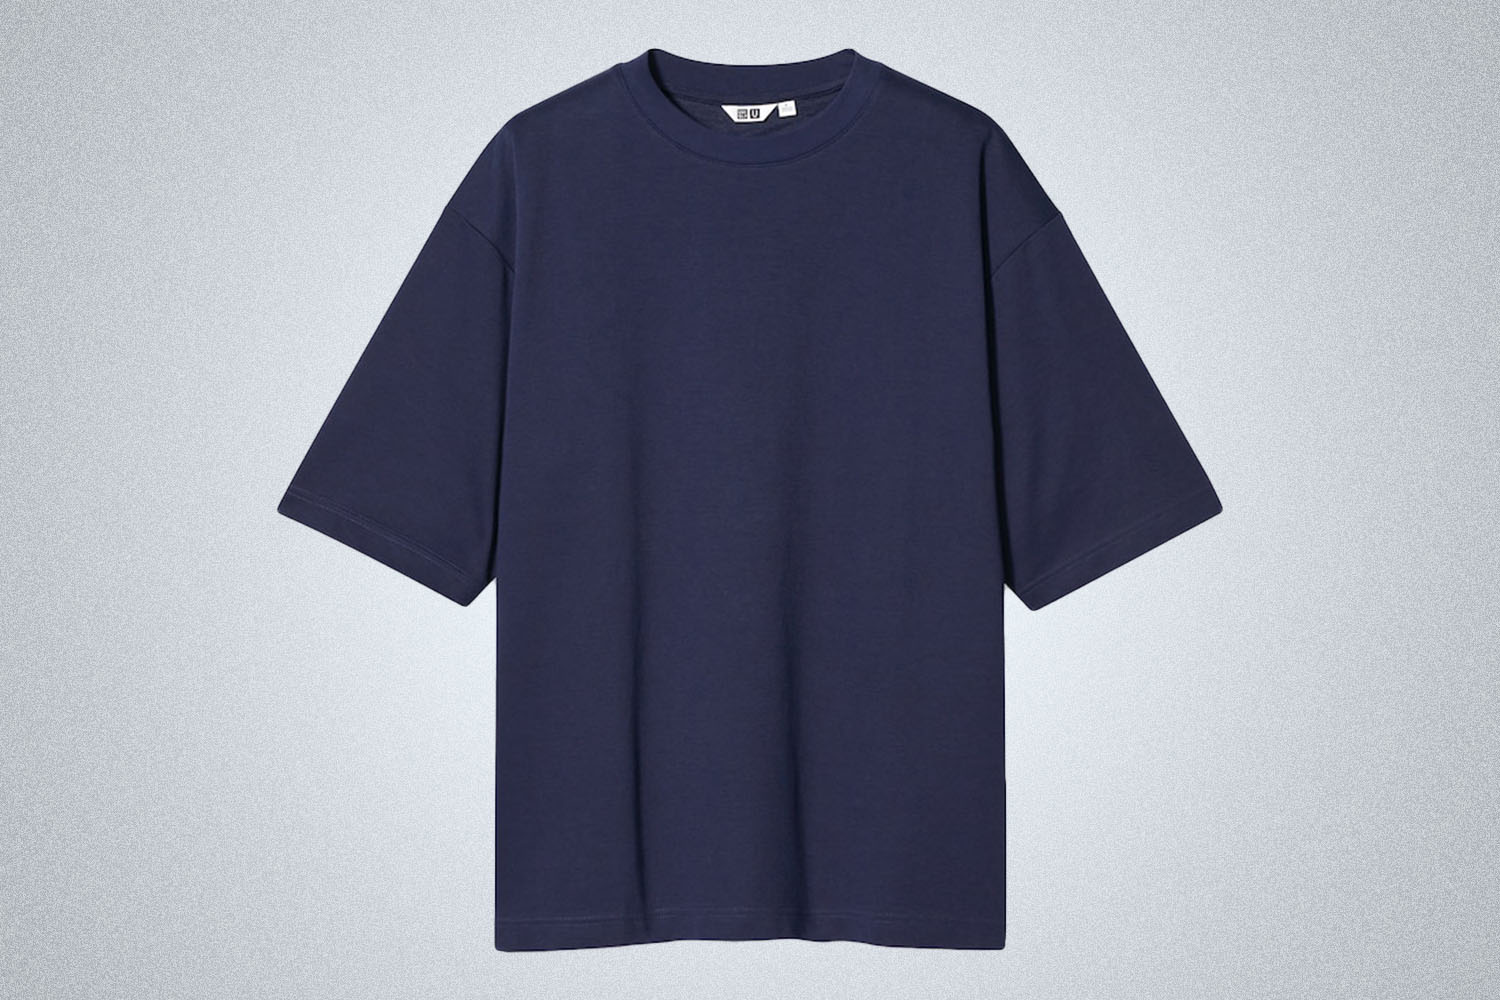 a blue tee on a grey background